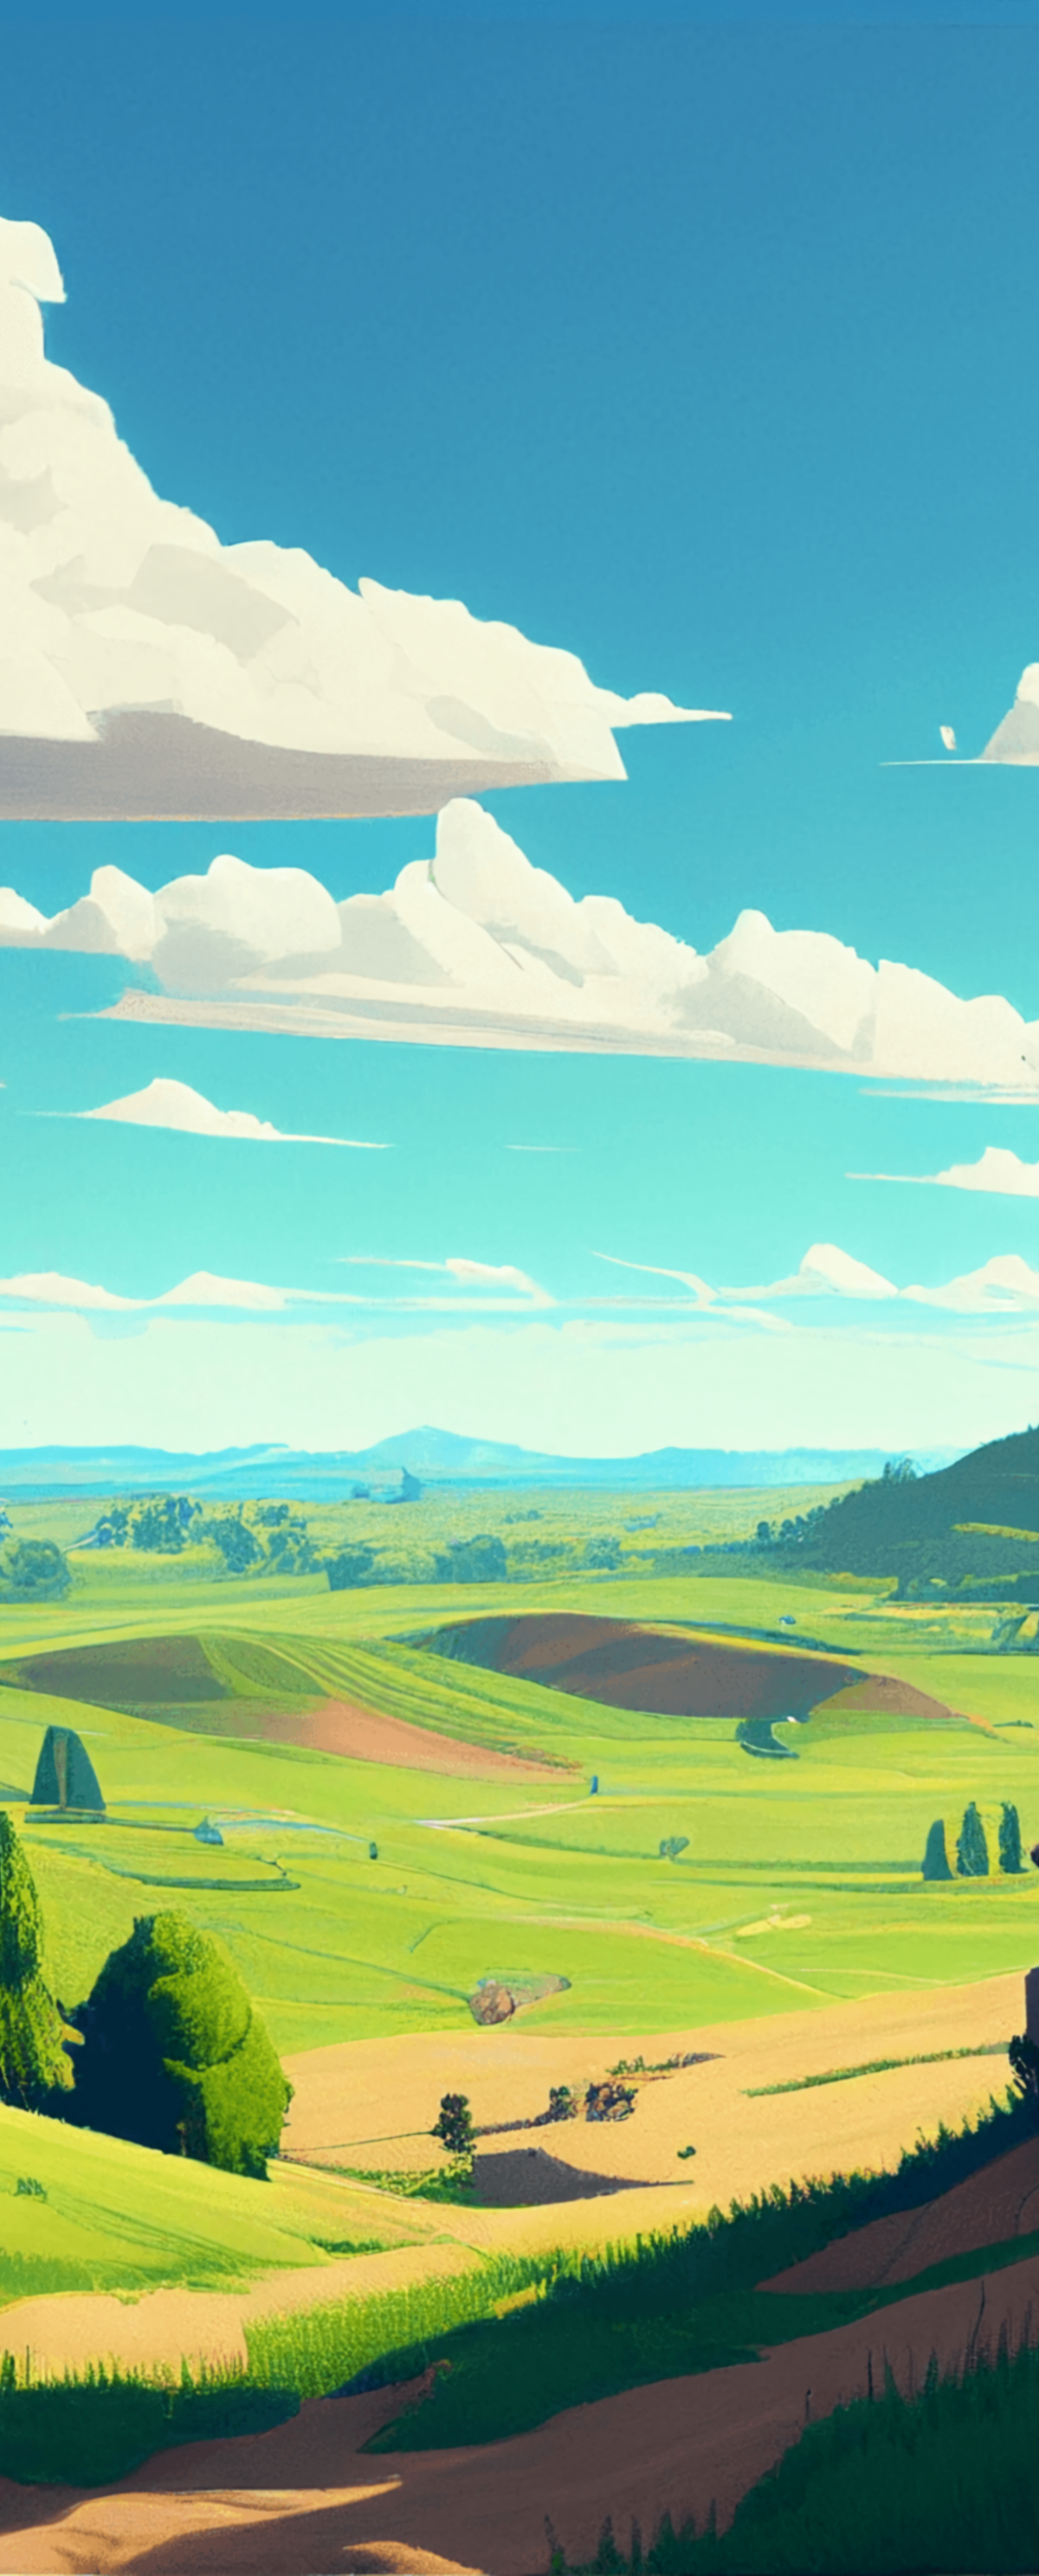 A sunny day with clear blue skies and green rolling hills